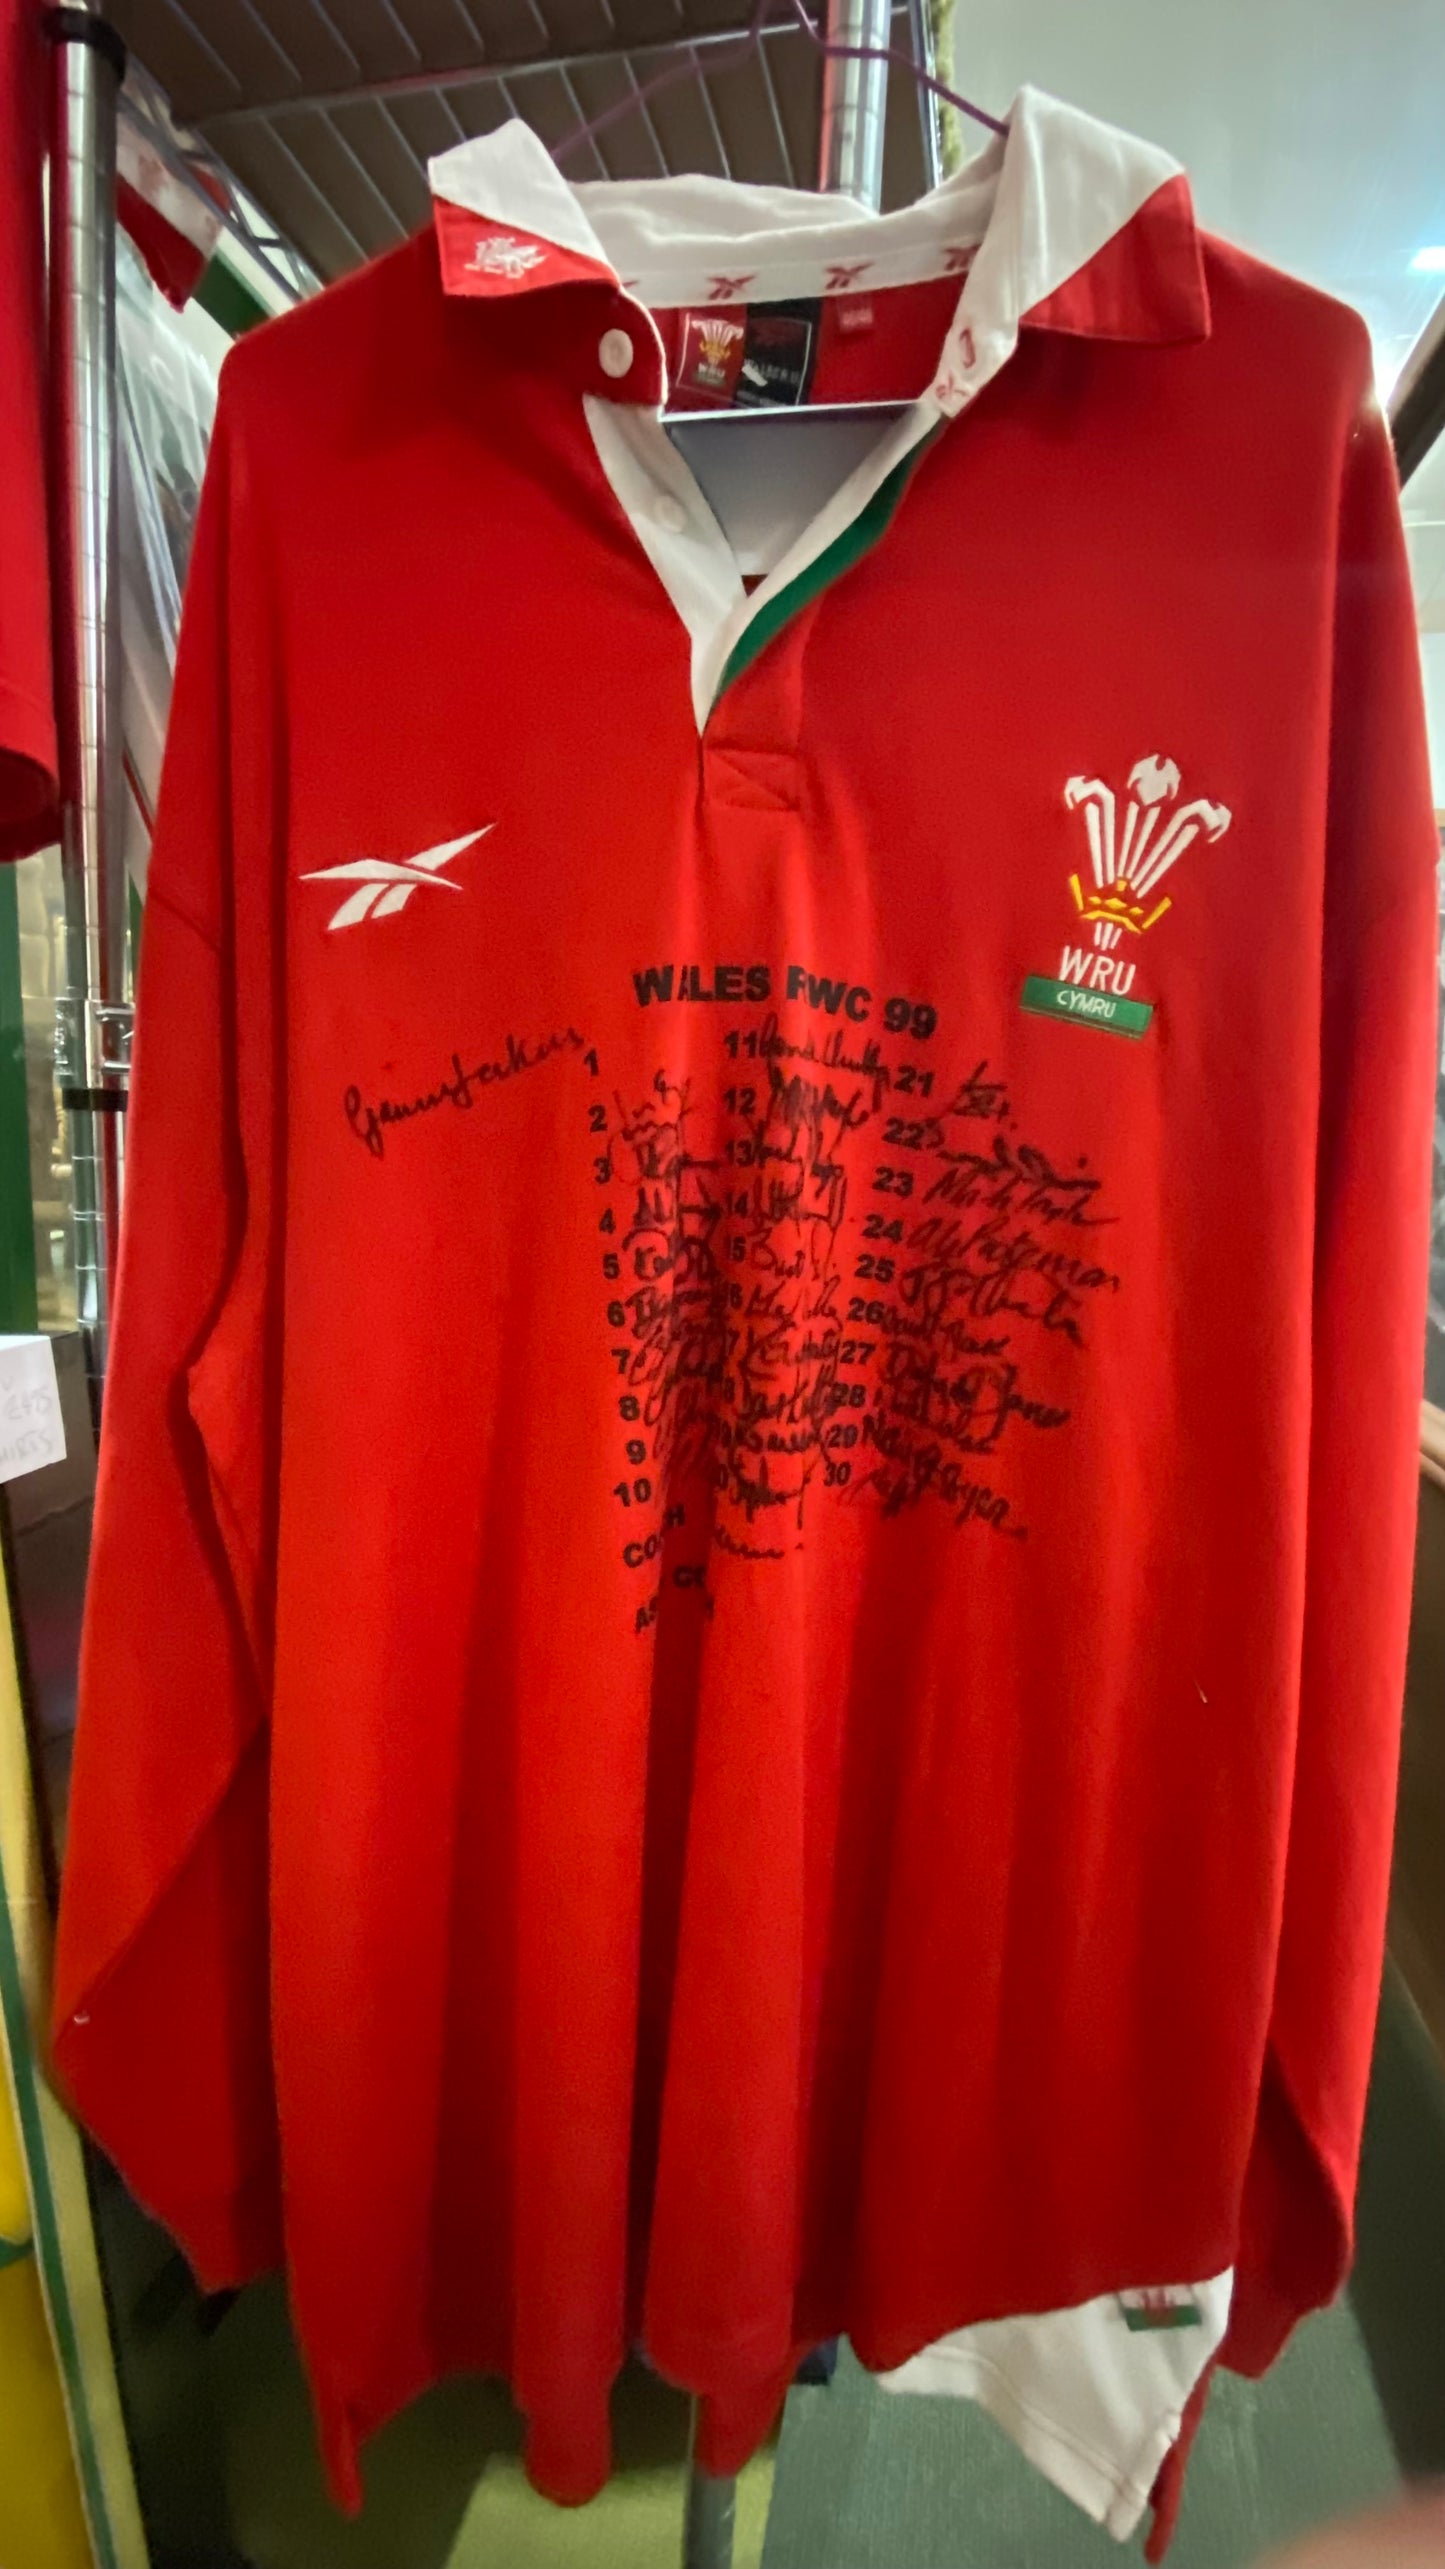 Wales Rugby 99 Signed Shirt